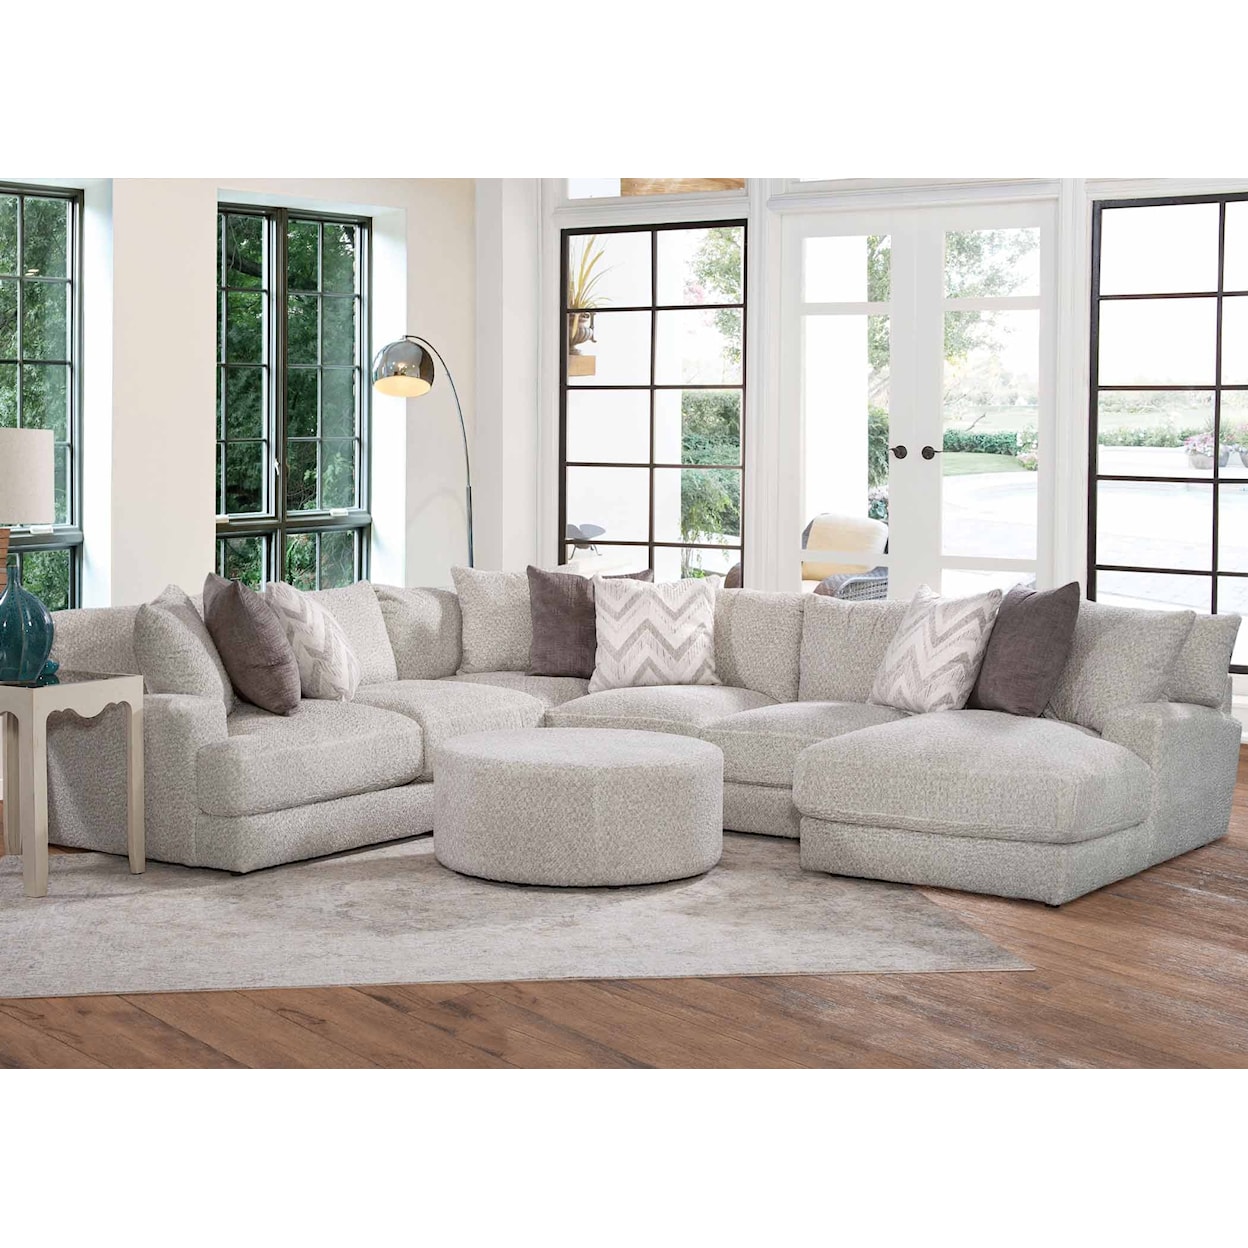 Franklin 877 Lennox 4-Piece Modular Sectional with Round Ottoman